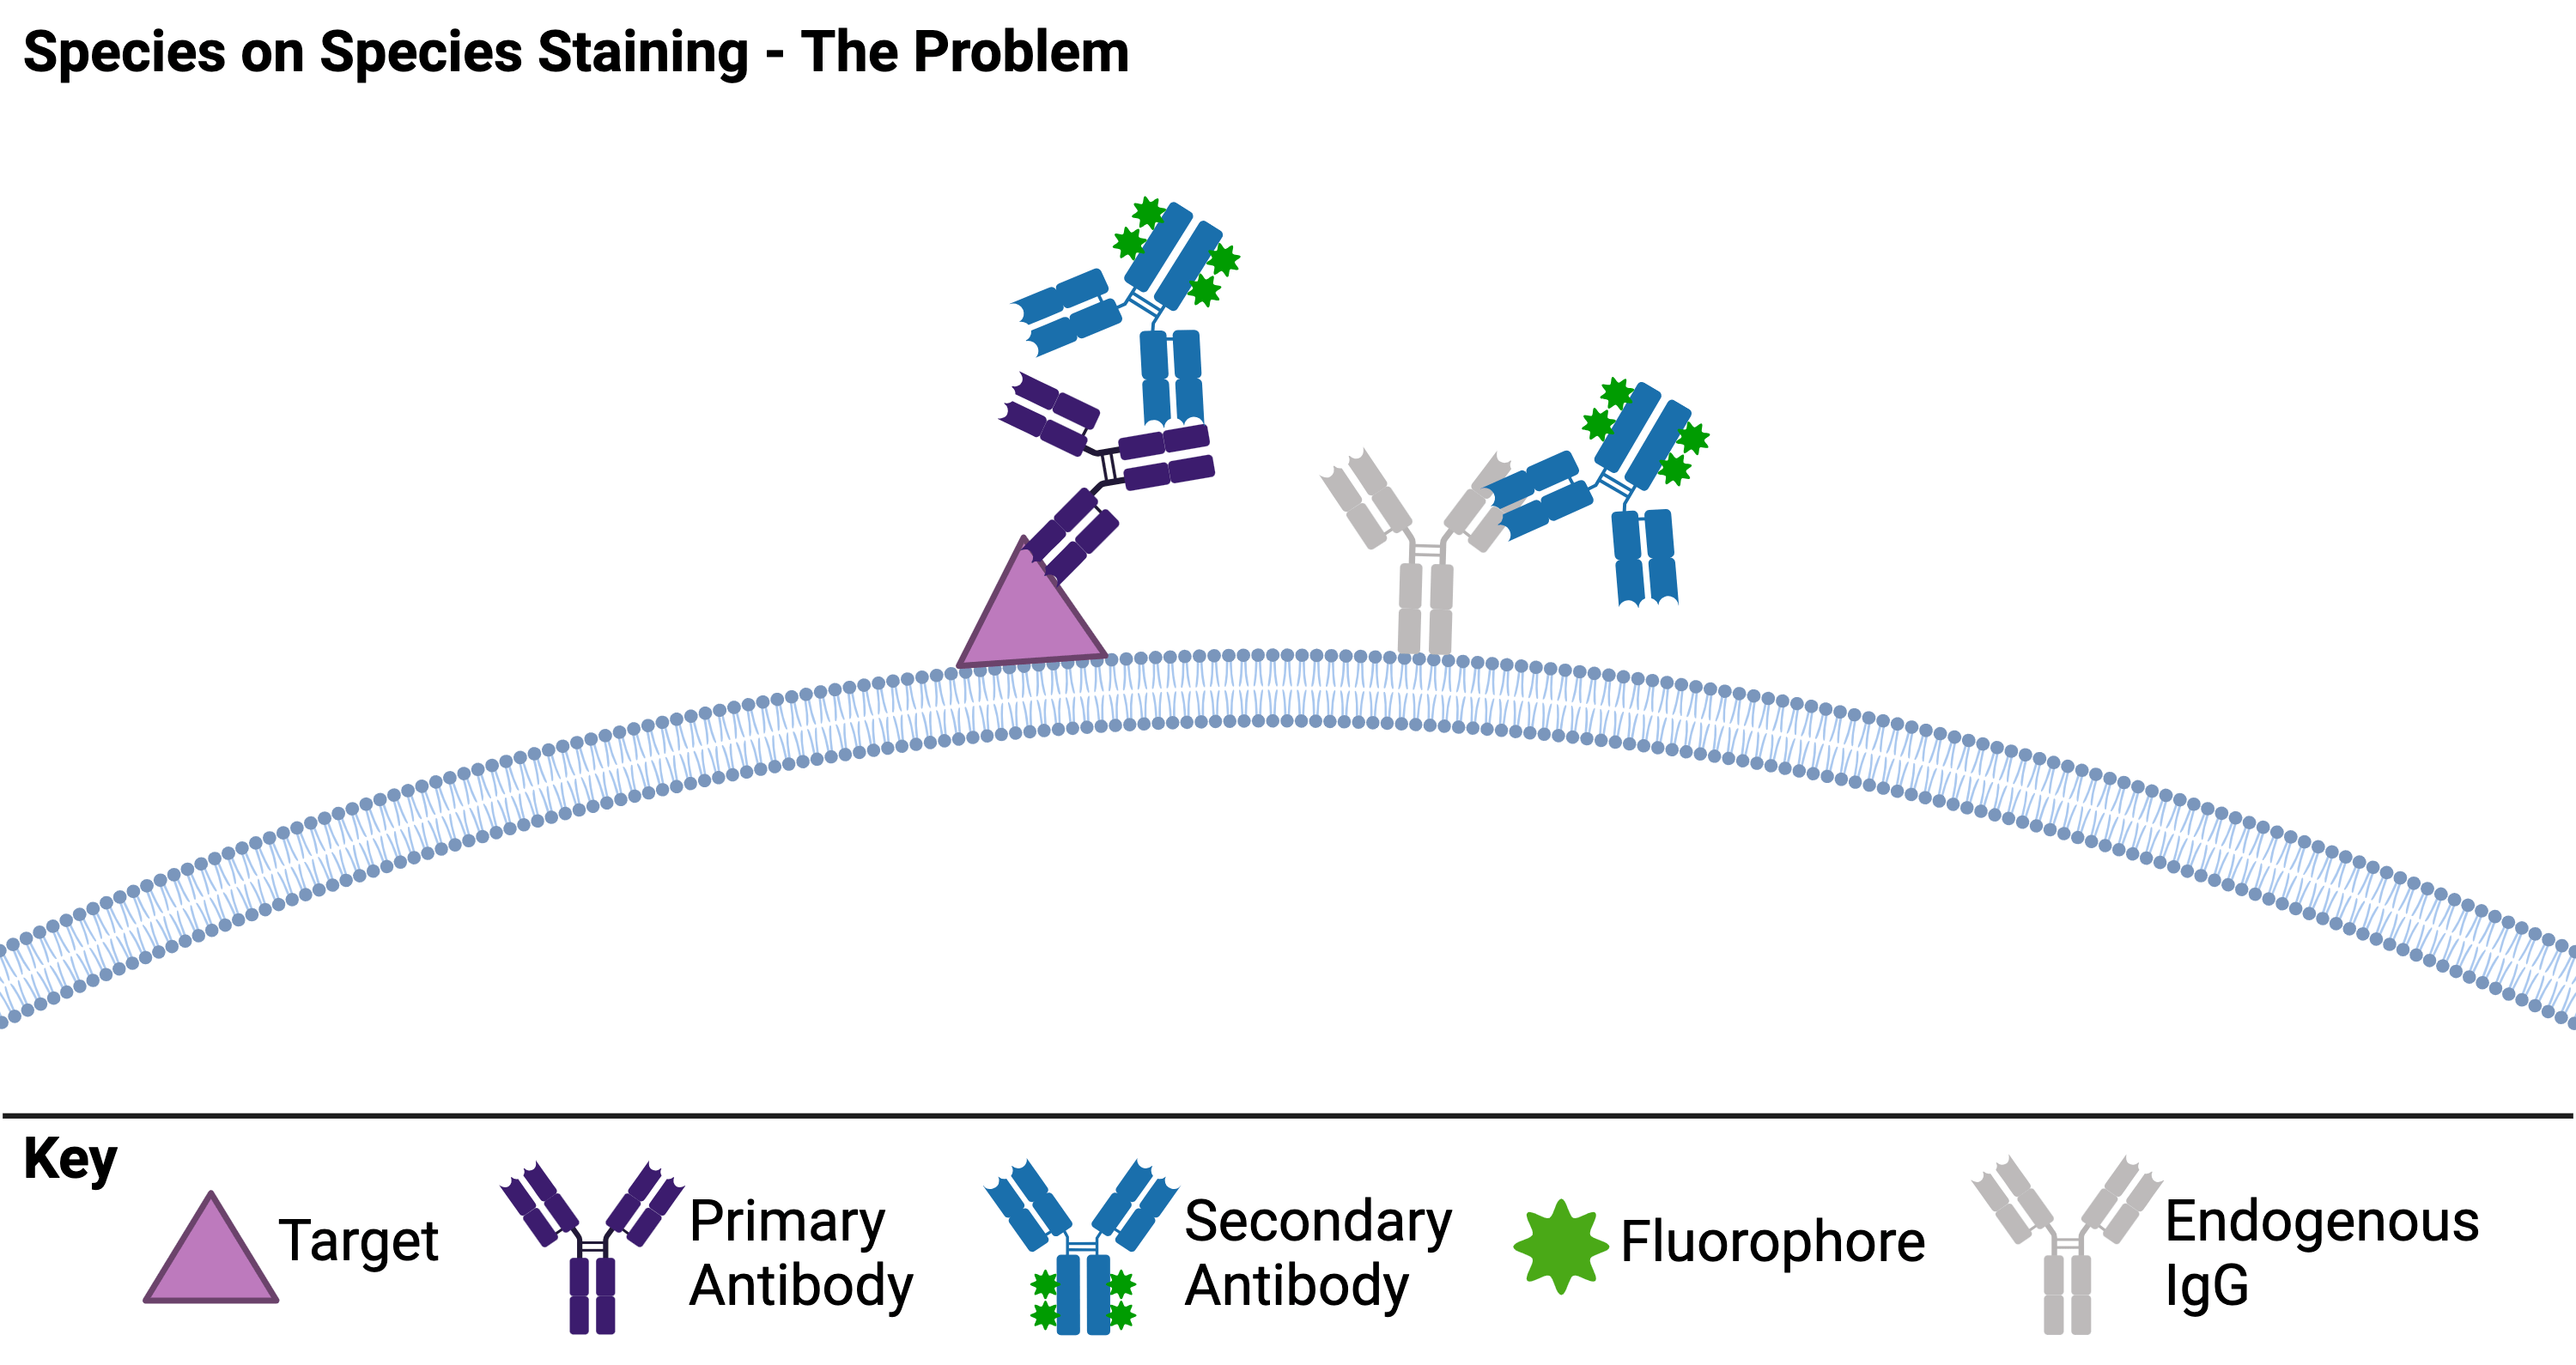 Schematic summarizing the problem with species on species immunohistochemistry. The schematic is titled Species on Species Staining - The Problem and shows a cell membrane with a target protein and an endogenous IgG. A primary antibody is bound to the target and secondary antibodies conjugated with fluorophores are bound to both the primary antibody and the endogenous IgG. 